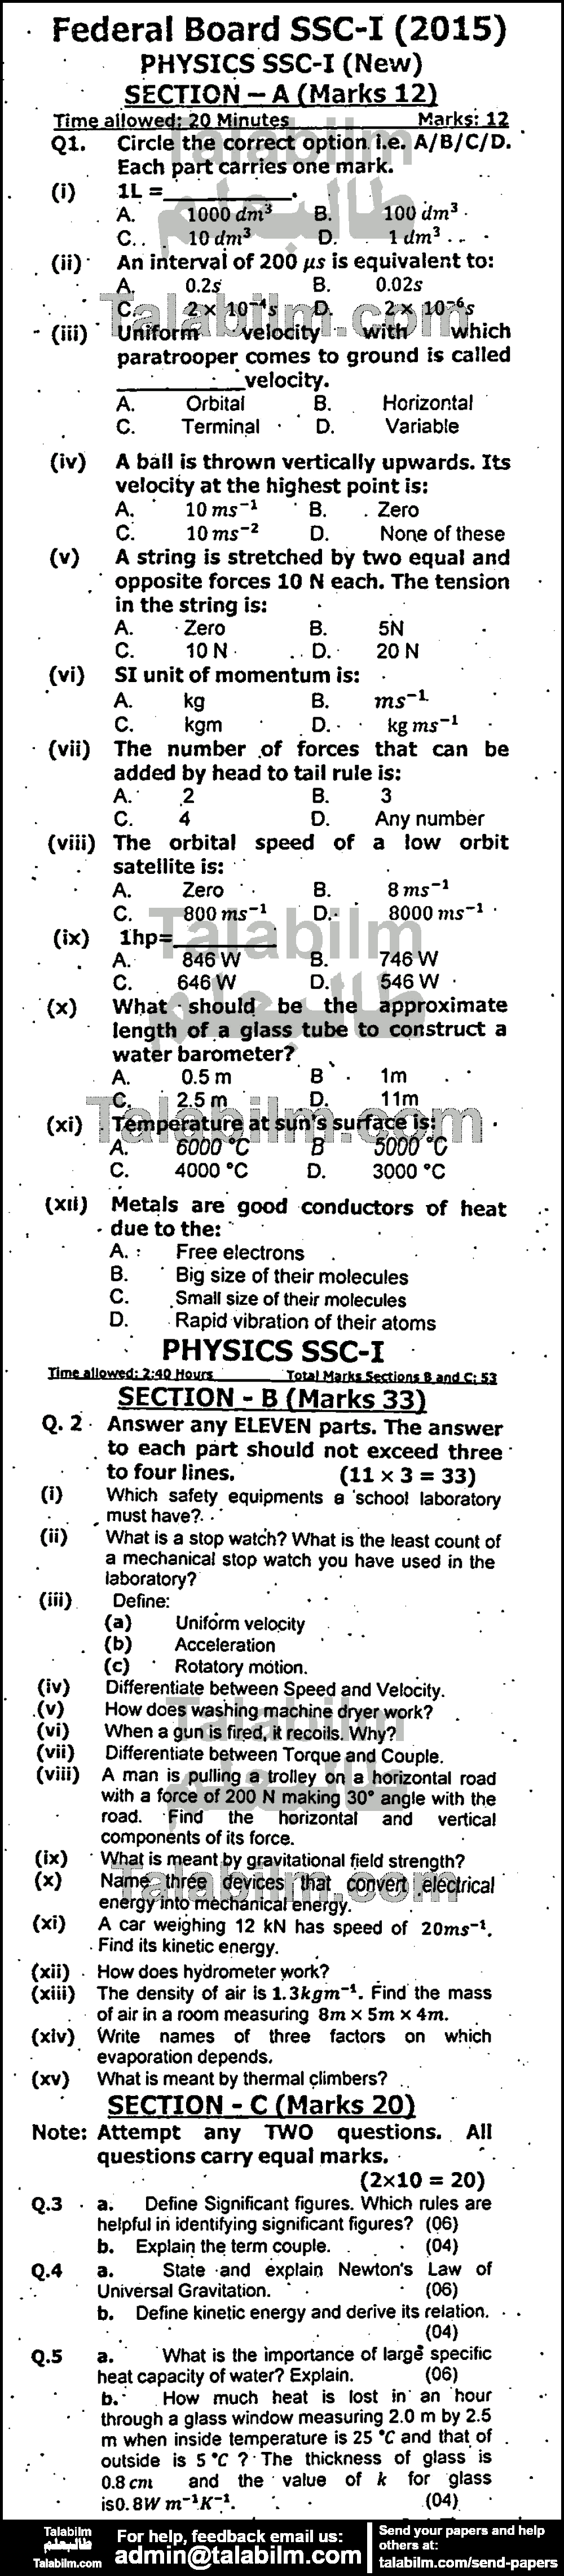 Physics 0 past paper for 2015 Group-I